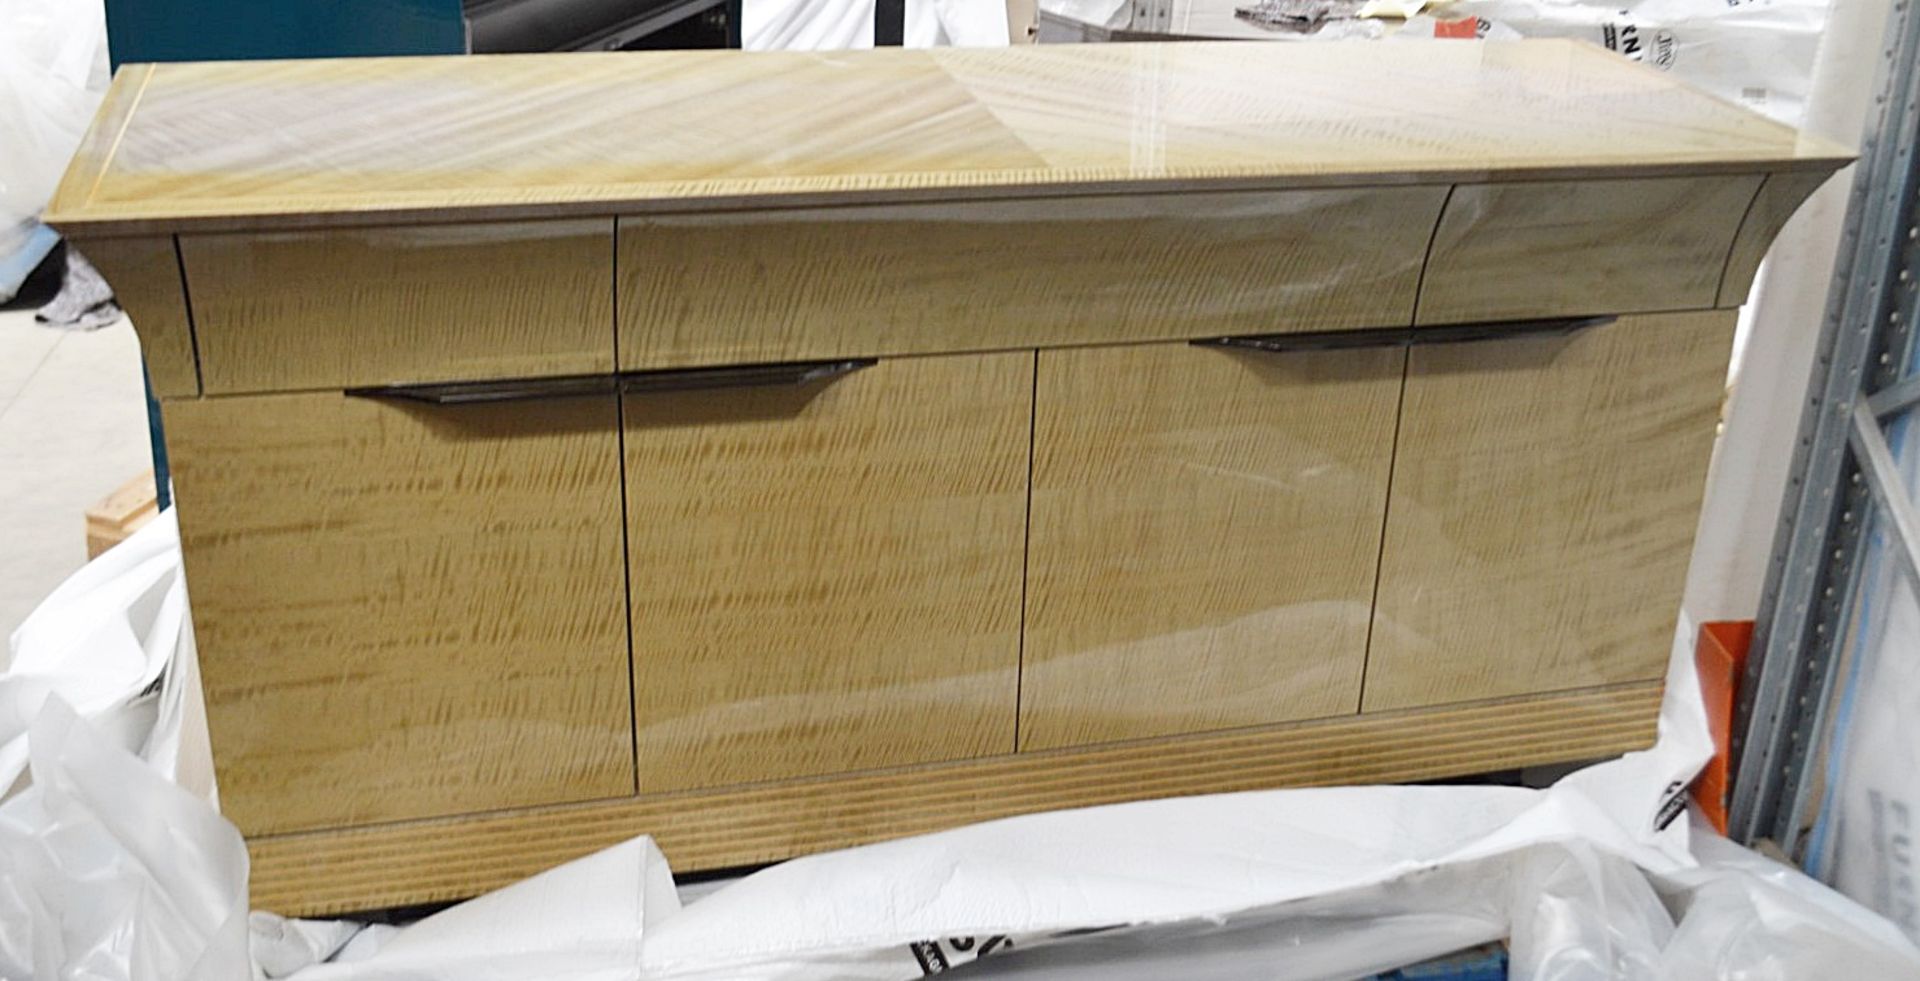 1 x GIORGIO COLLECTION 'Alchemy' Buffet / Sideboard Unit (Model: 6810/80) - Original RRP £3,495 - Image 4 of 8